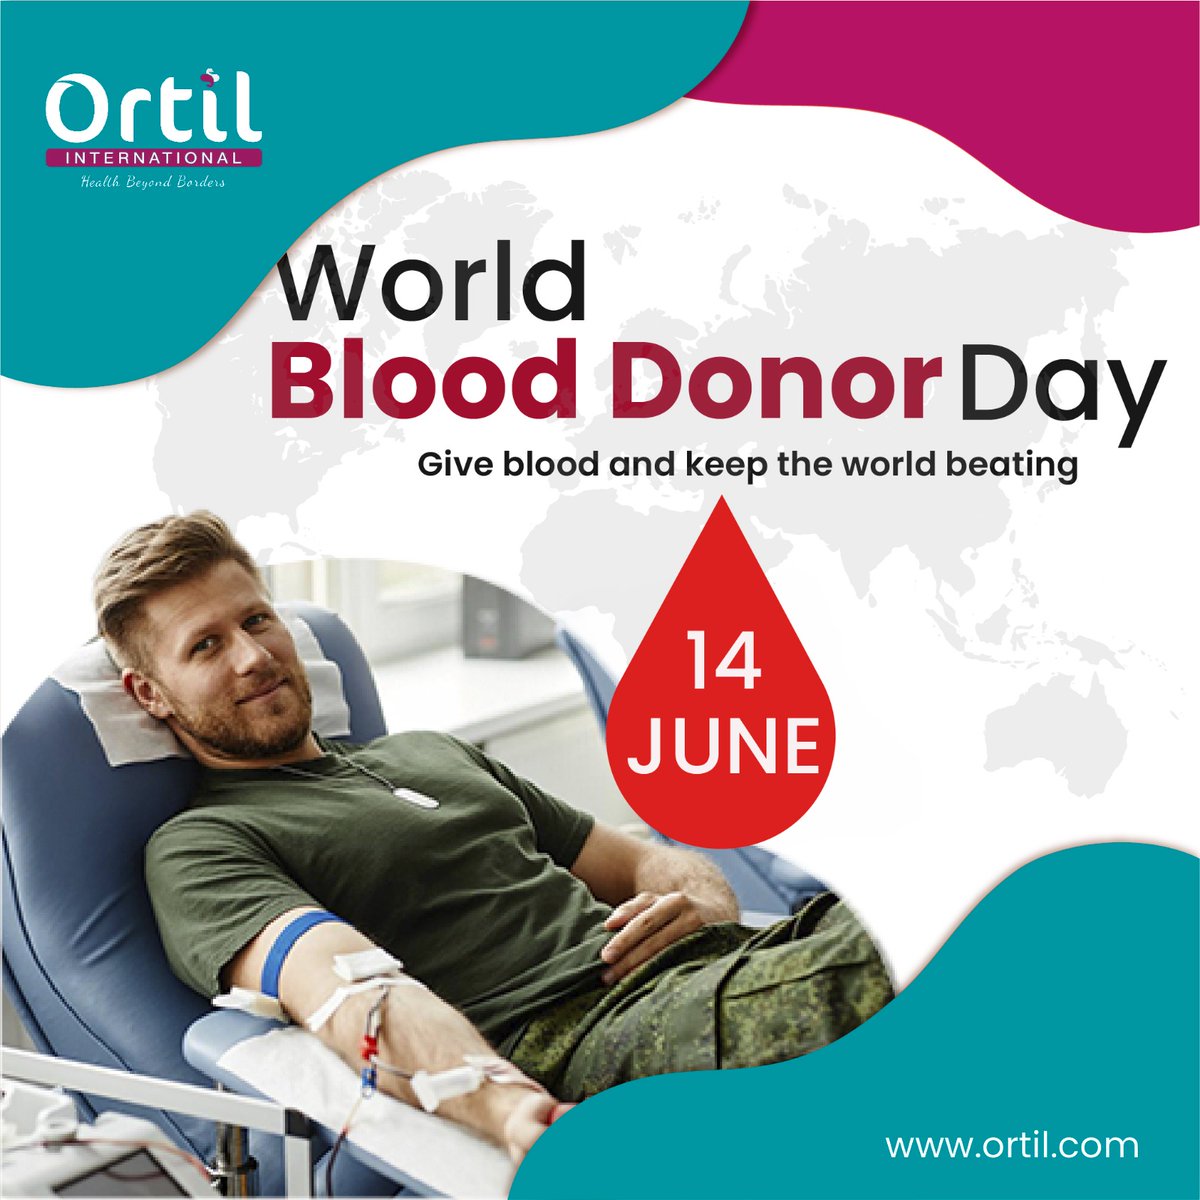 Join us in celebrating World Blood Donor Day 2023!
#WorldBloodDonorDay #BloodDonation #DonateBlood #SaveLives #BloodDonors #WorldBloodDonorDay #SaveLives #DonateBlood #GiveBloodSaveLives #BloodDonation #HealthcareHeroes #BloodDonorAwareness #ImprovingHealth #DonateLife